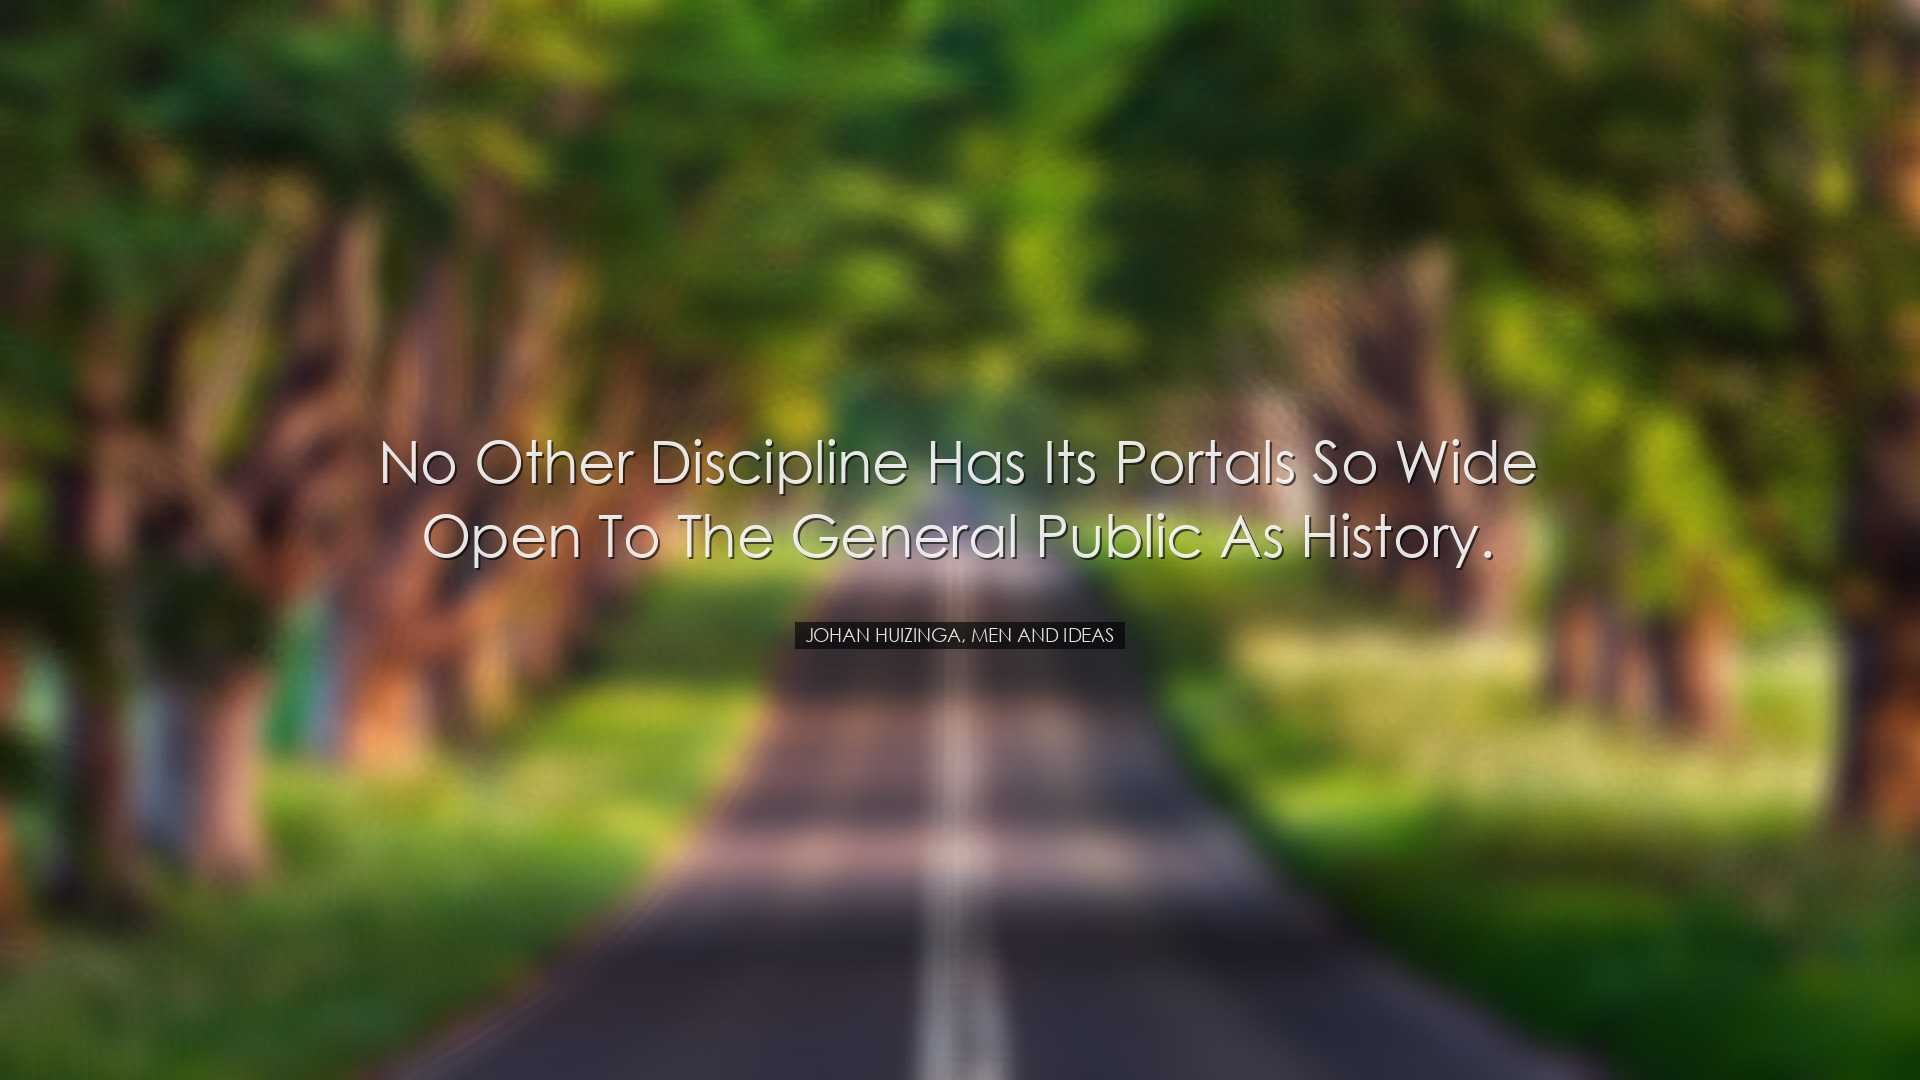 No other discipline has its portals so wide open to the general pu